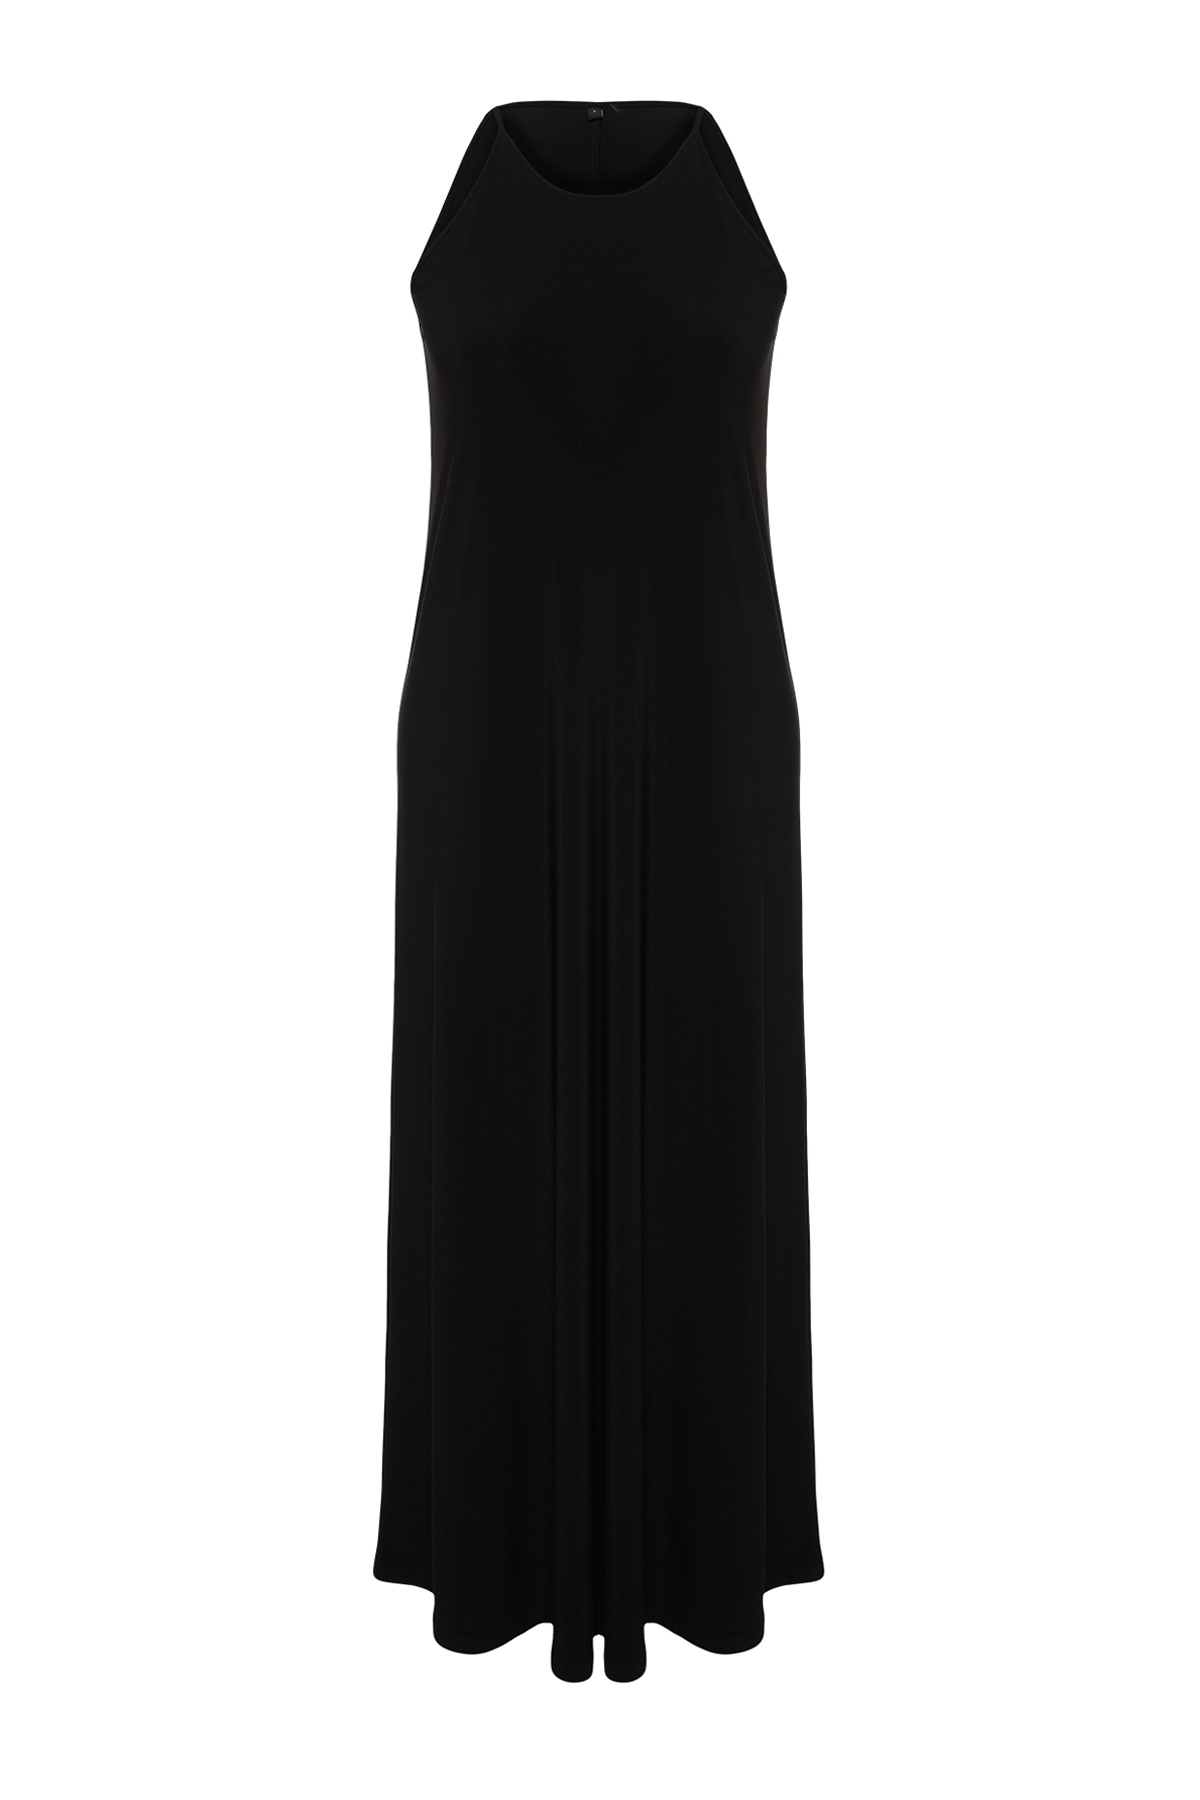 Trendyol Black Limited Edition Printed Strappy Tie Detail Elastic Knitted Maxi Dress